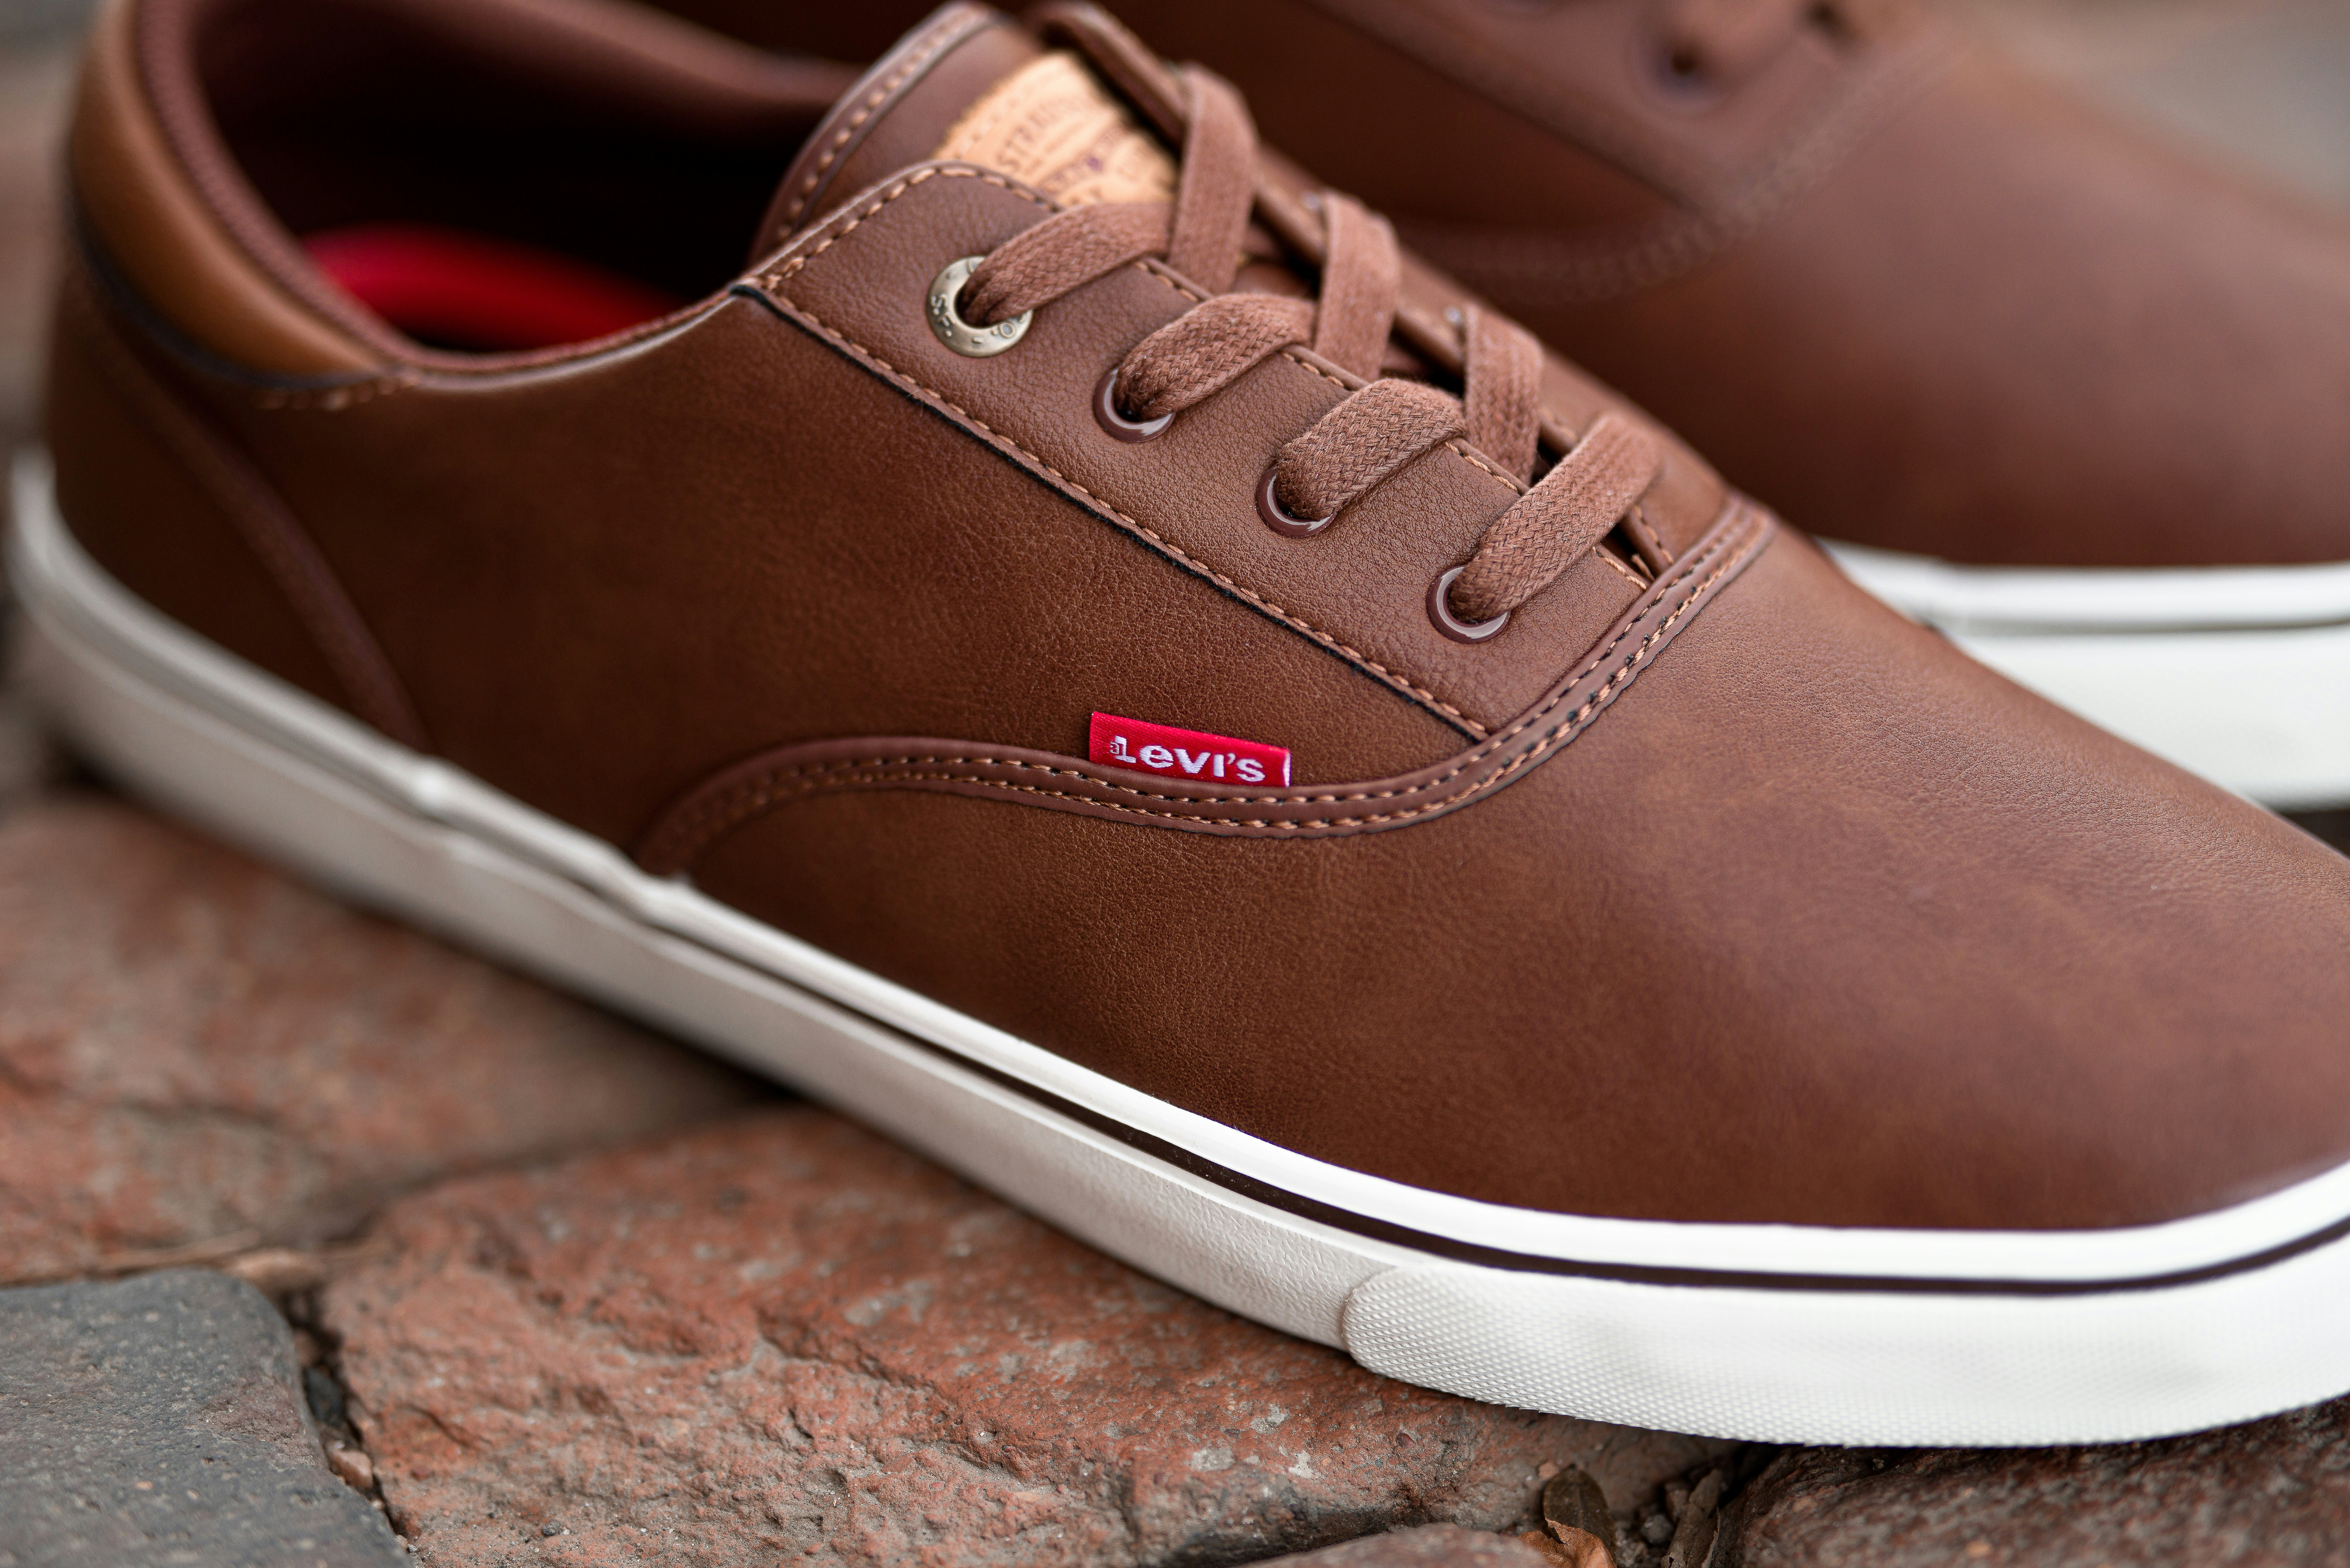 Levis Brown Sneakers Sweden, SAVE 44% - aveclumiere.com